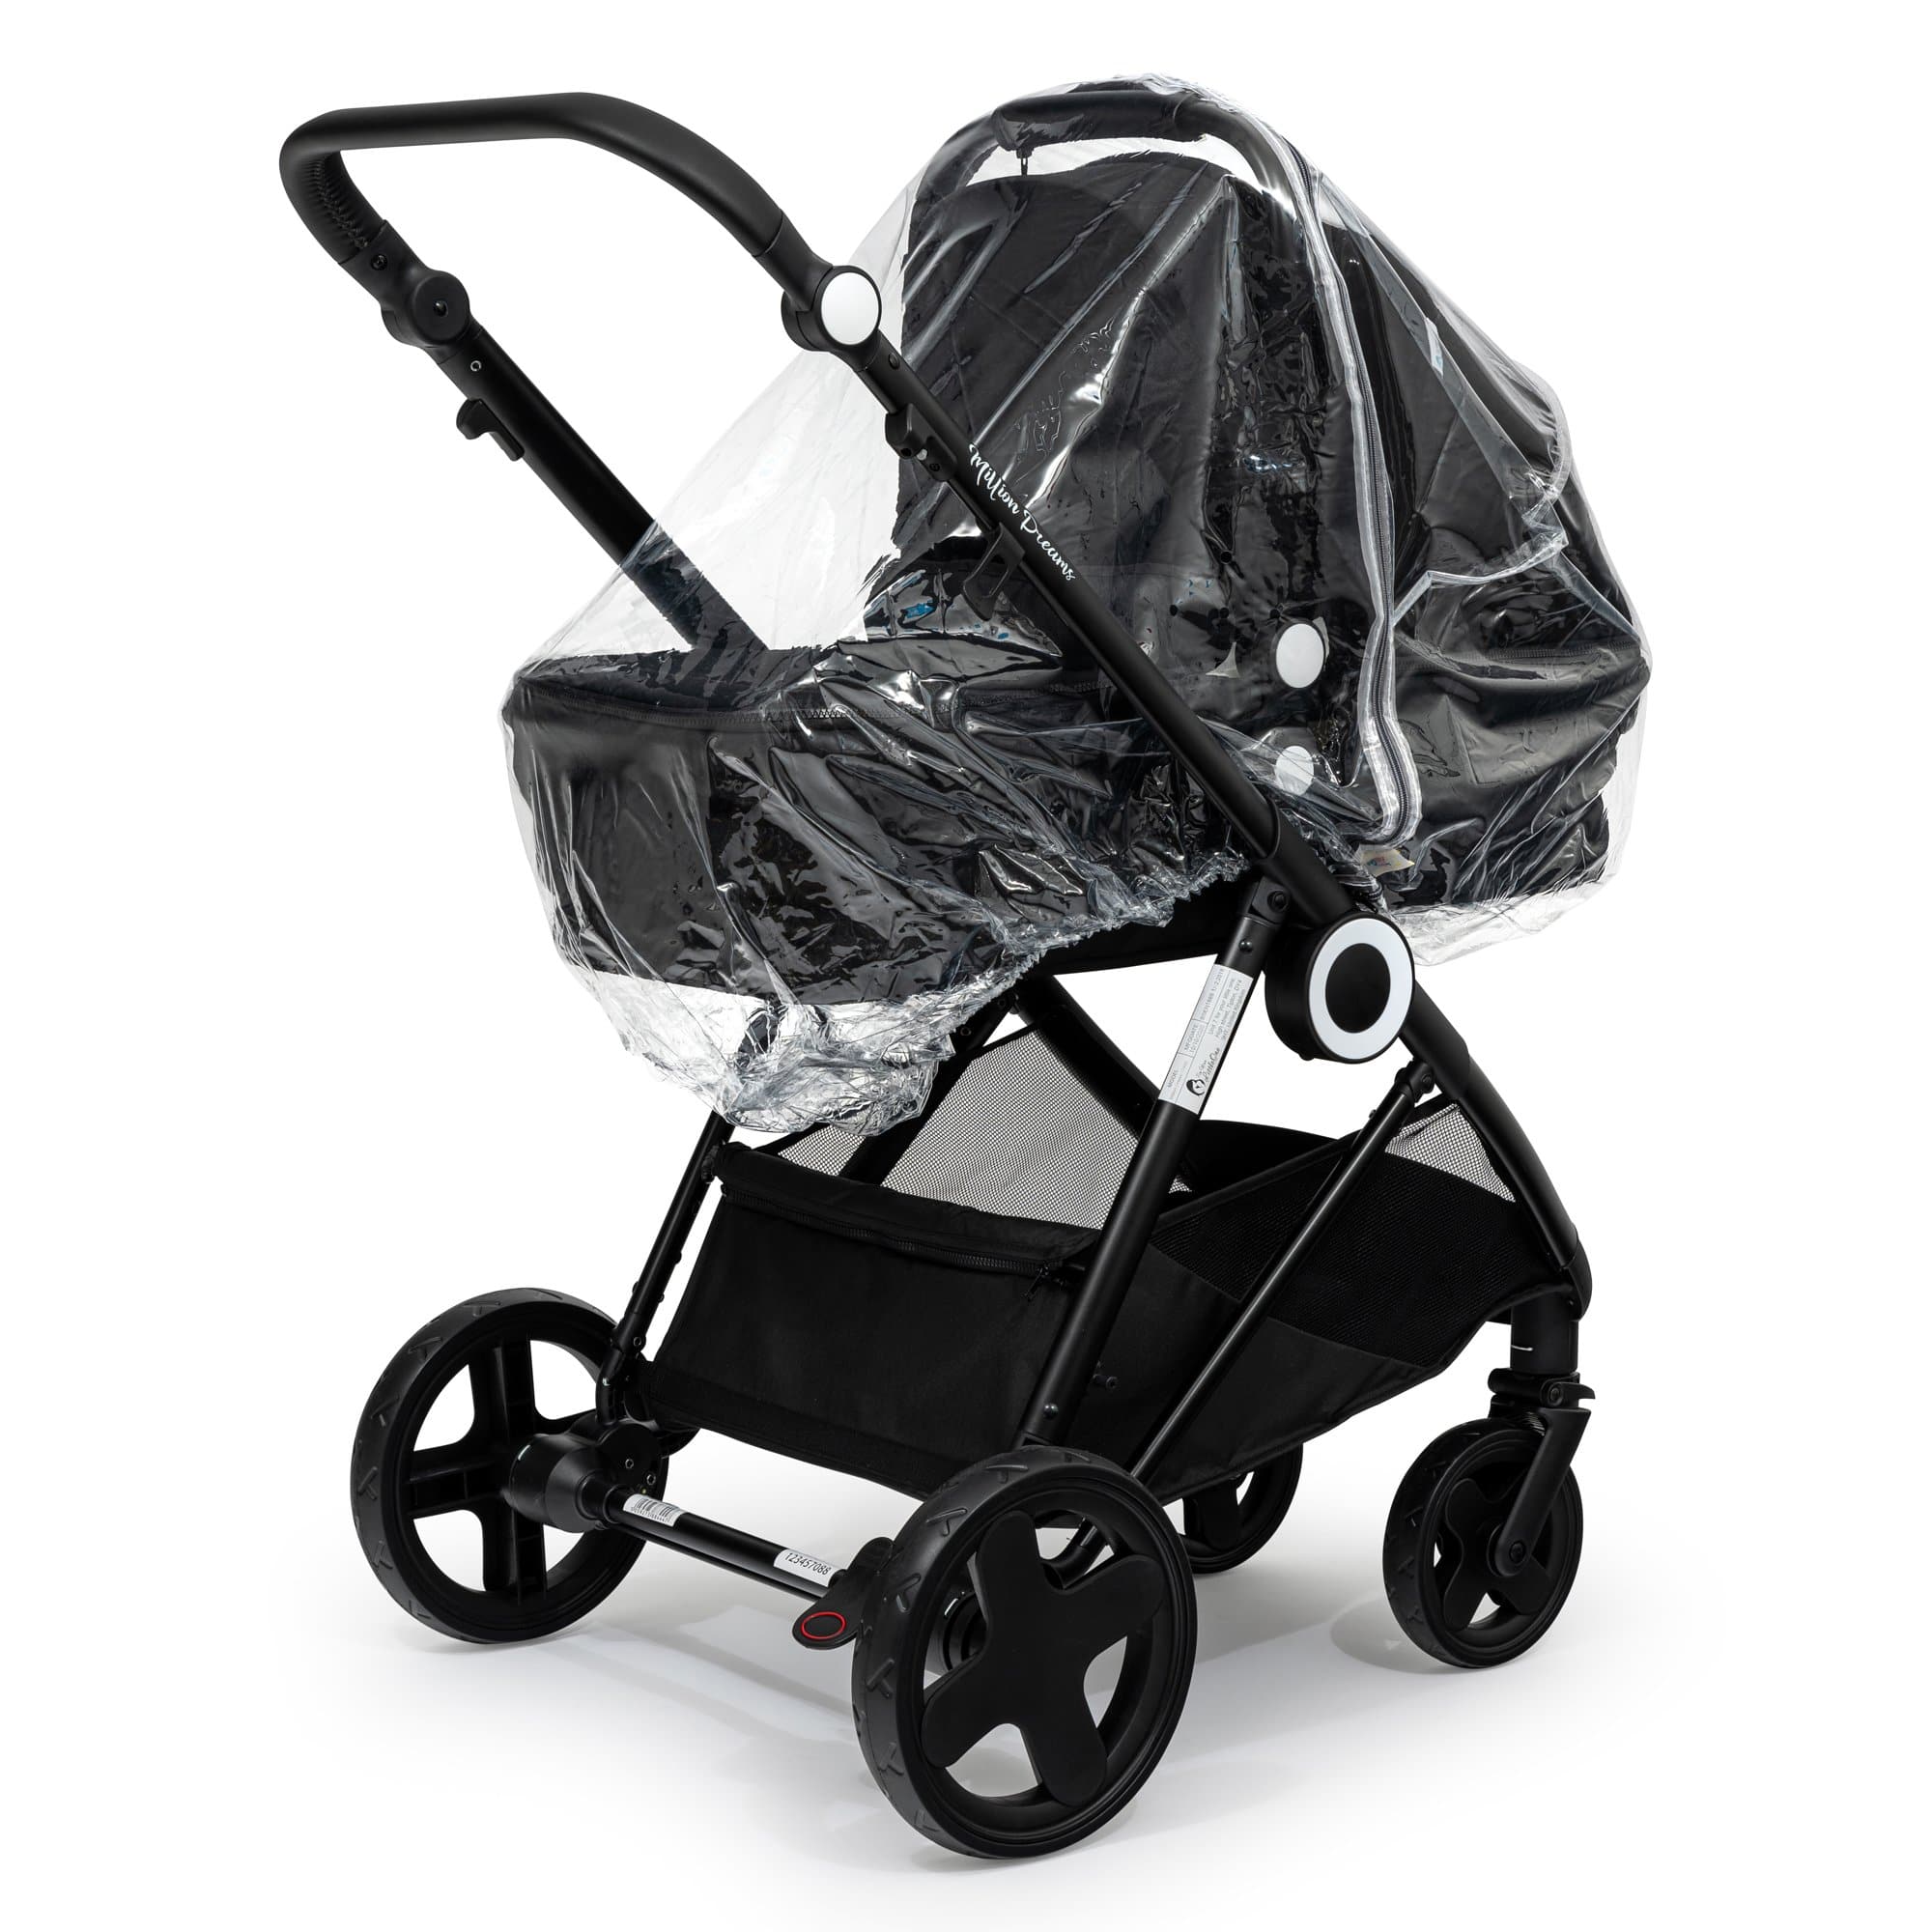 Universal Rain Cover For 2 in 1 Prams - Fits All Models - For Your Little One